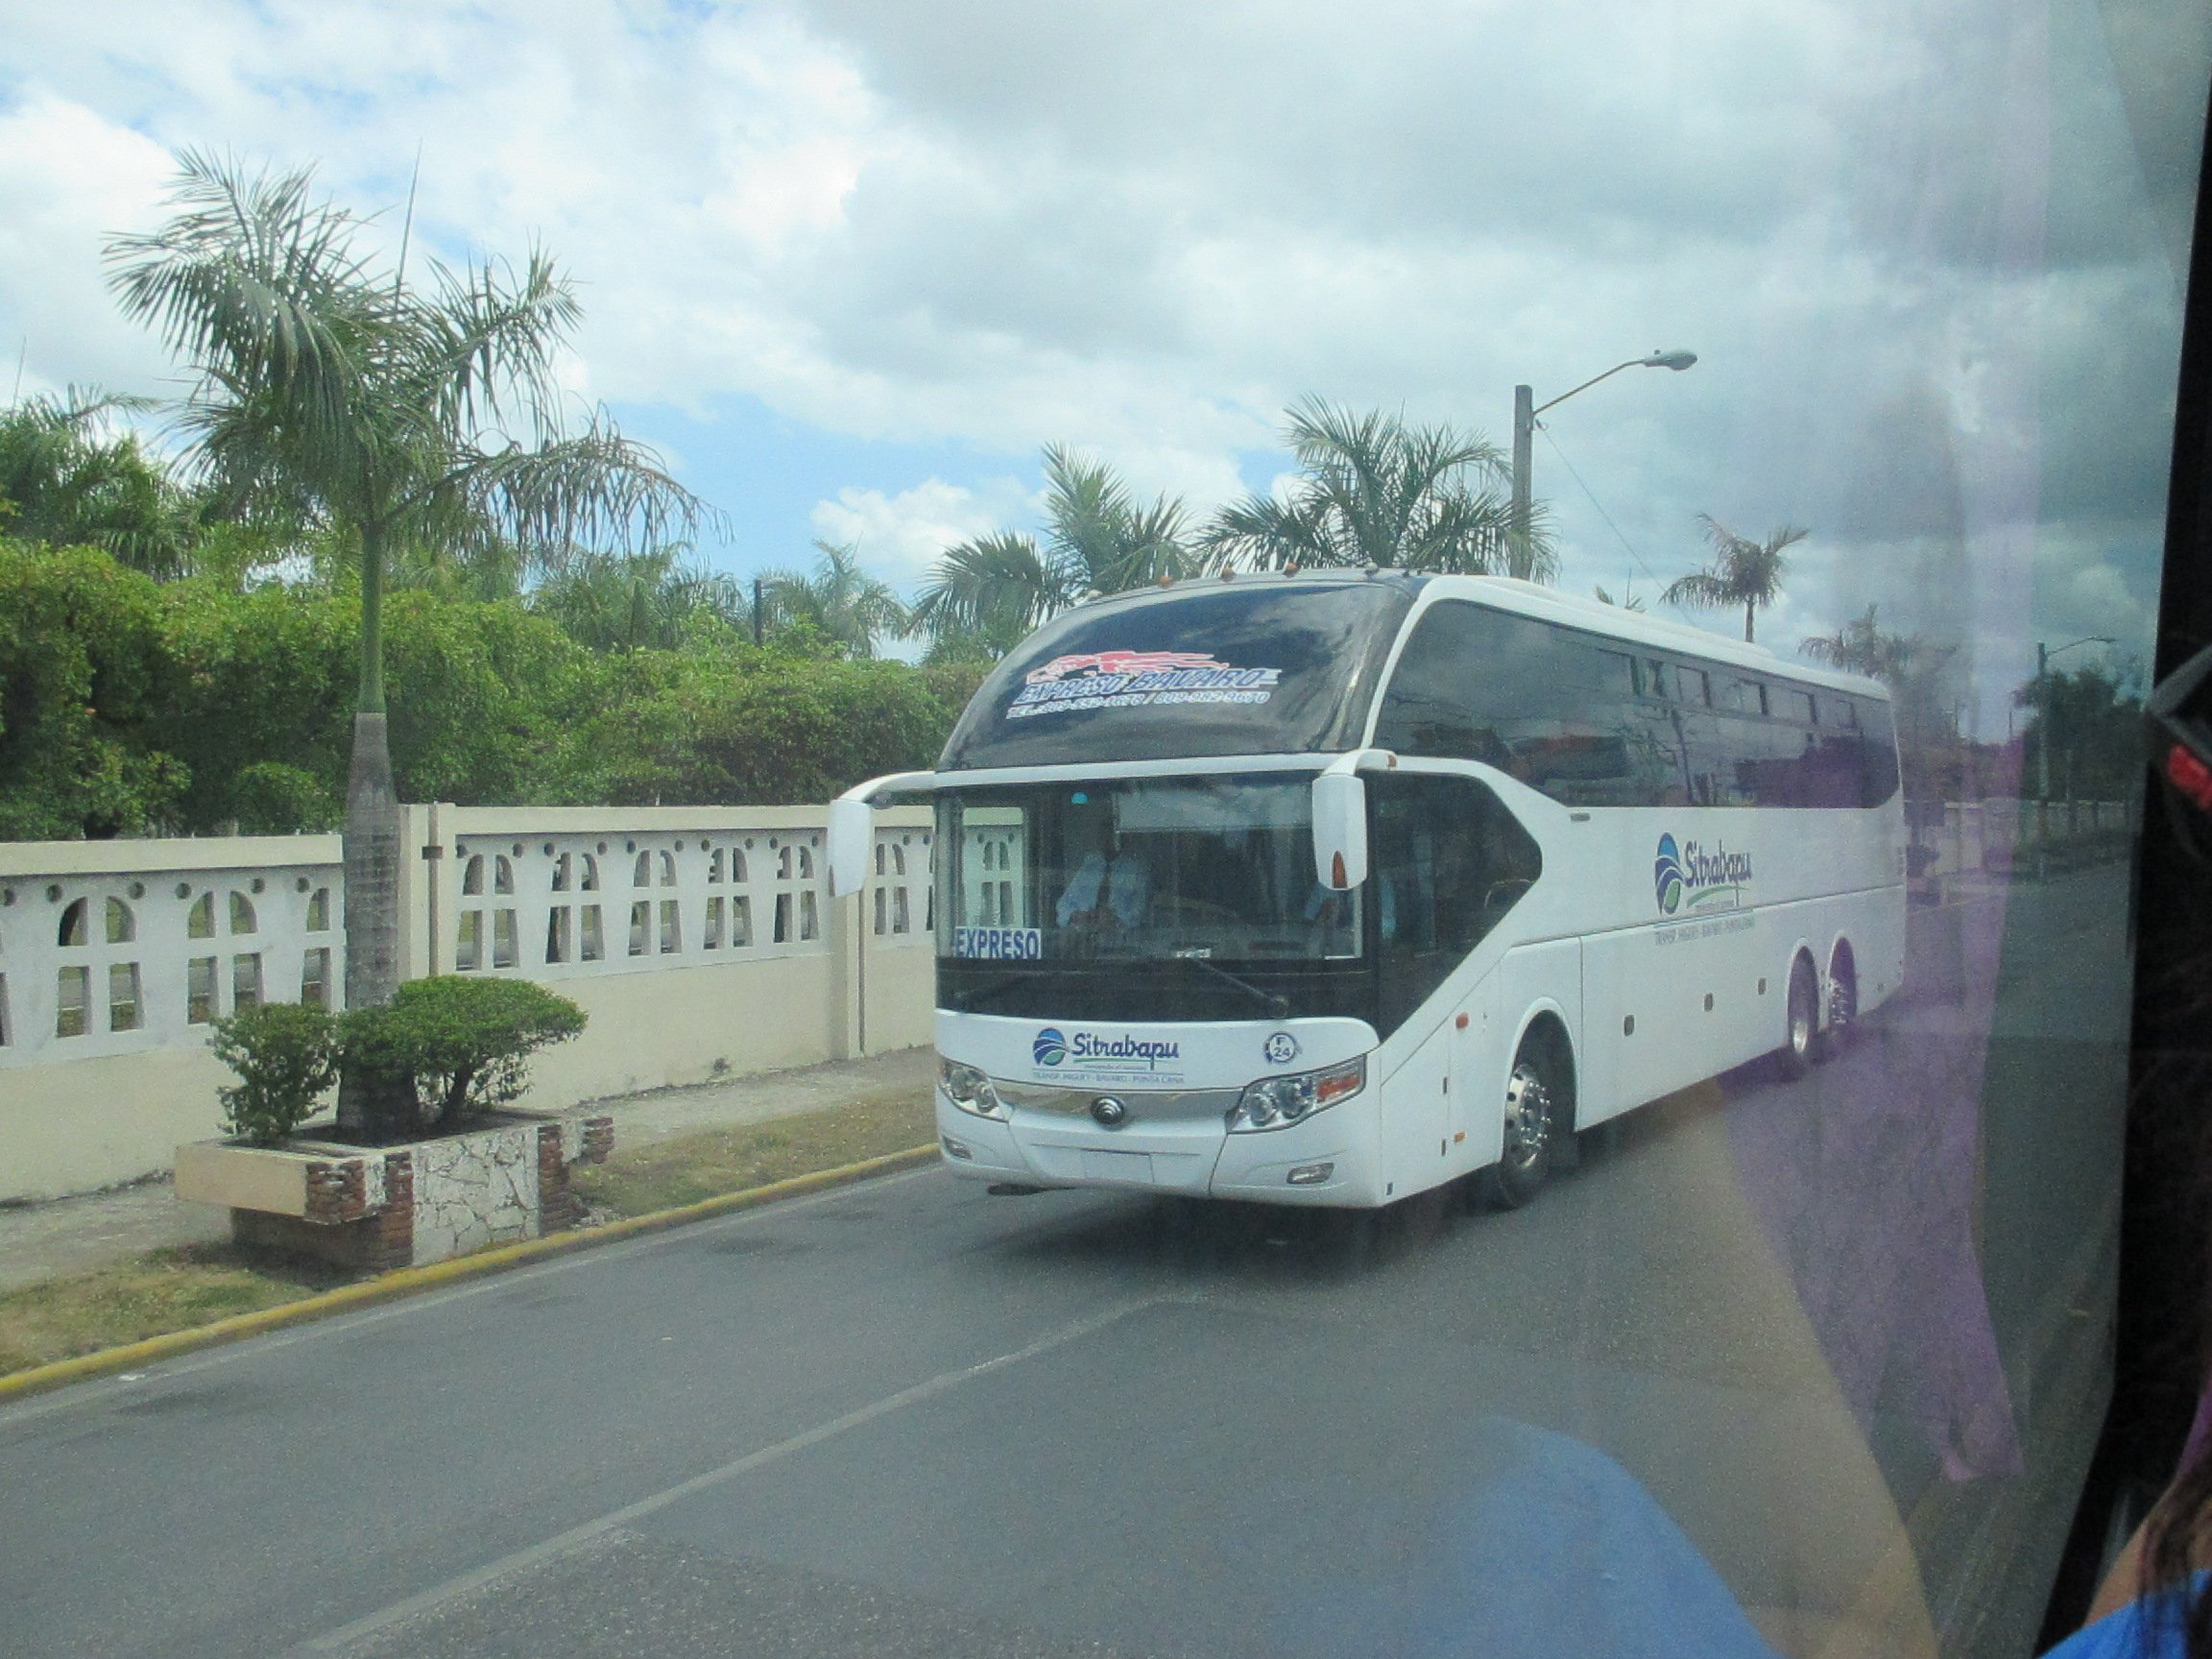 How To Get From Bayahibe To Punta Cana Airport - All Possible Ways, cheapest way from Bayahibe to Punta Cana airport, Bayahibe to Punta Cana, Bayahibe to Punta Cana bus, Bavaro Bus Expreso Bayahibe to Punta Cana